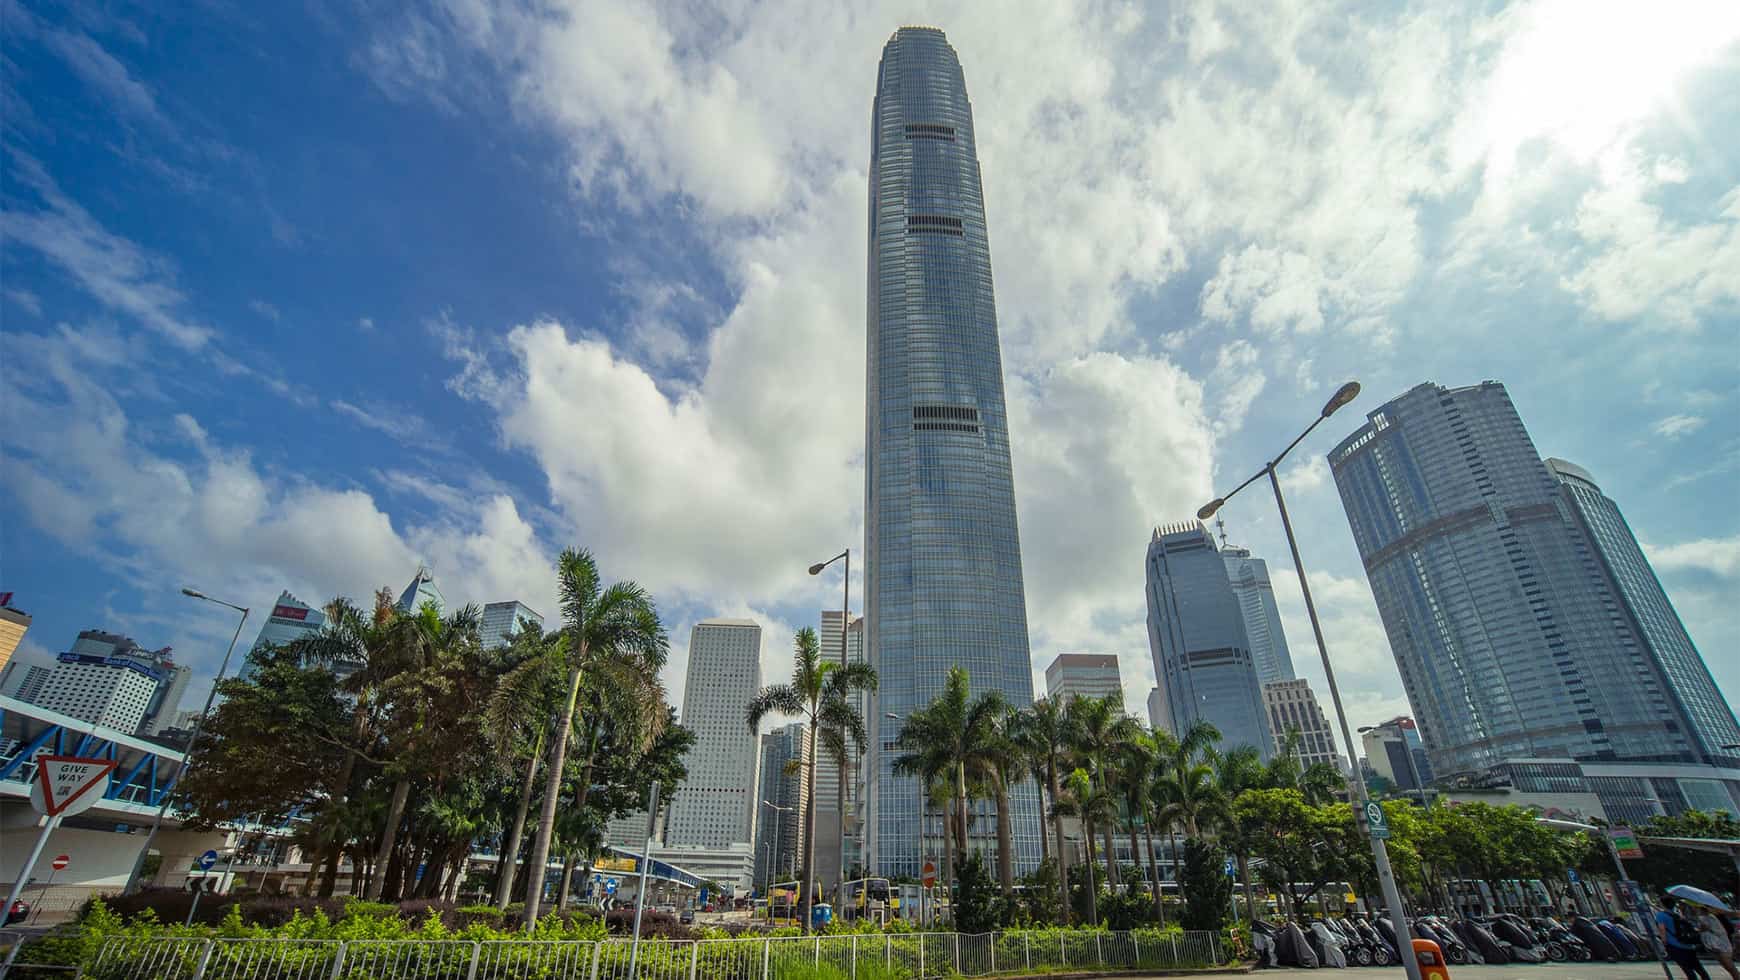 The Two International Finance Centre building in Hong Kong